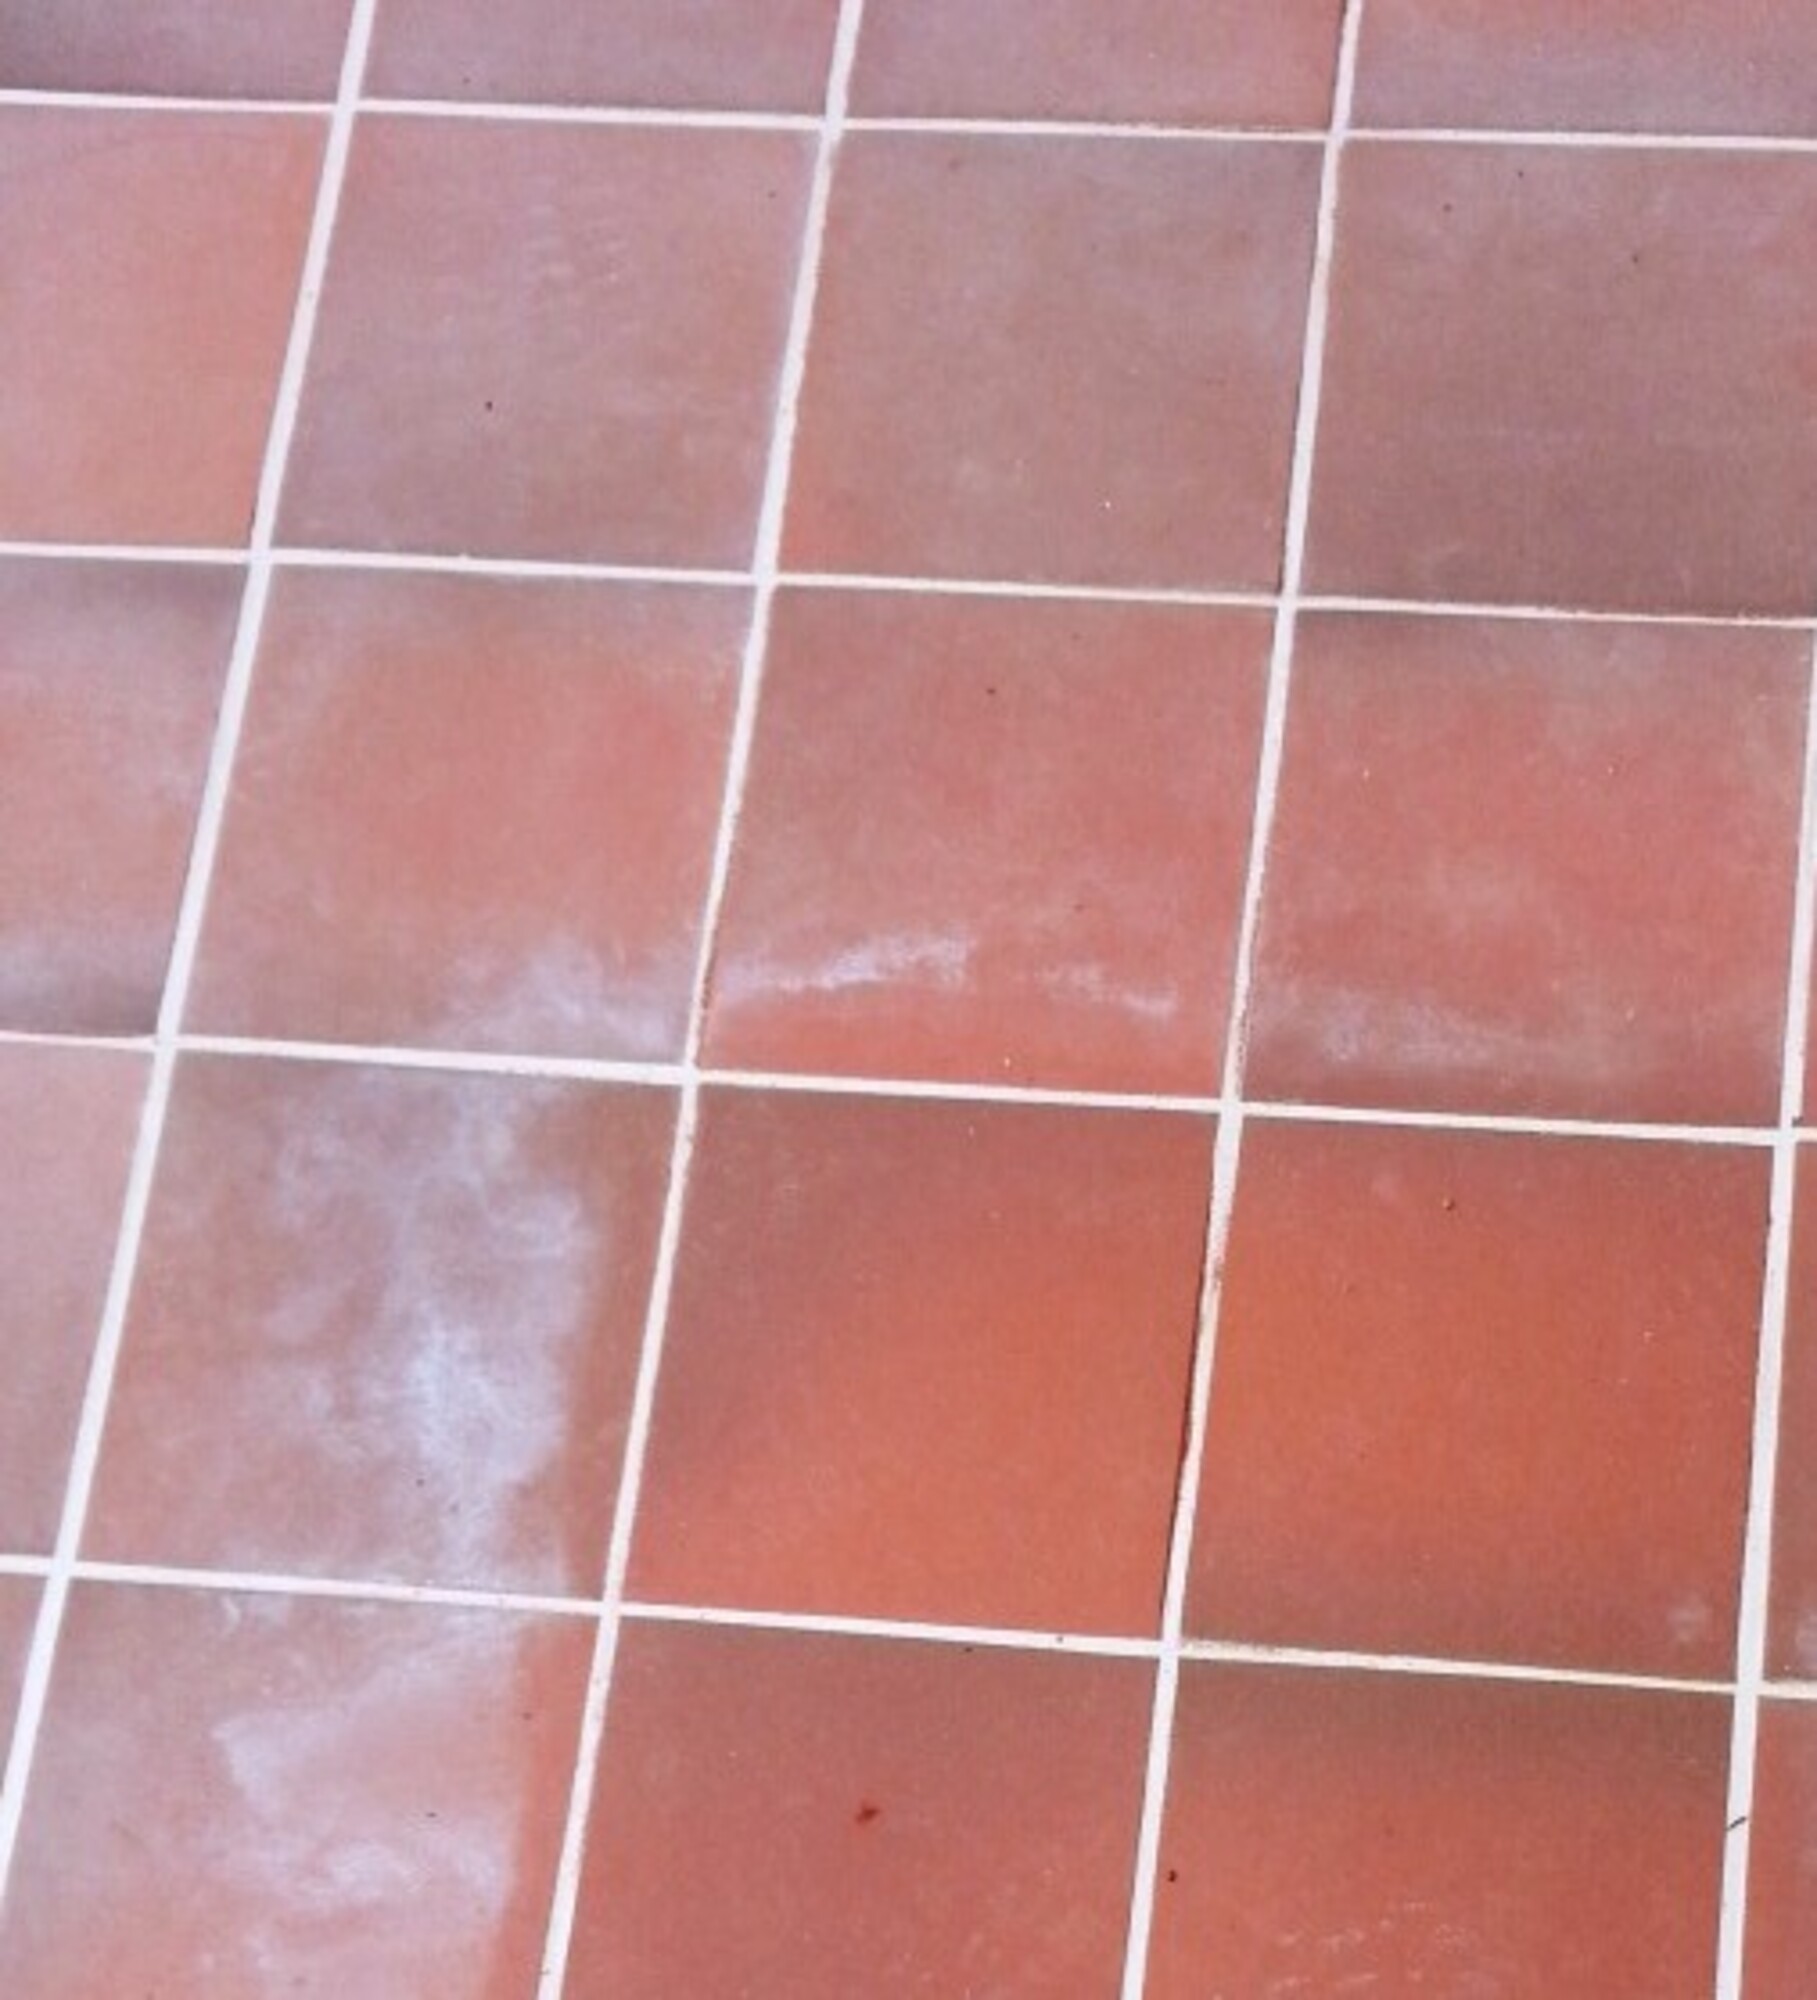 Grout Haze Remover Residue, What Takes Grout Haze Off Tiles